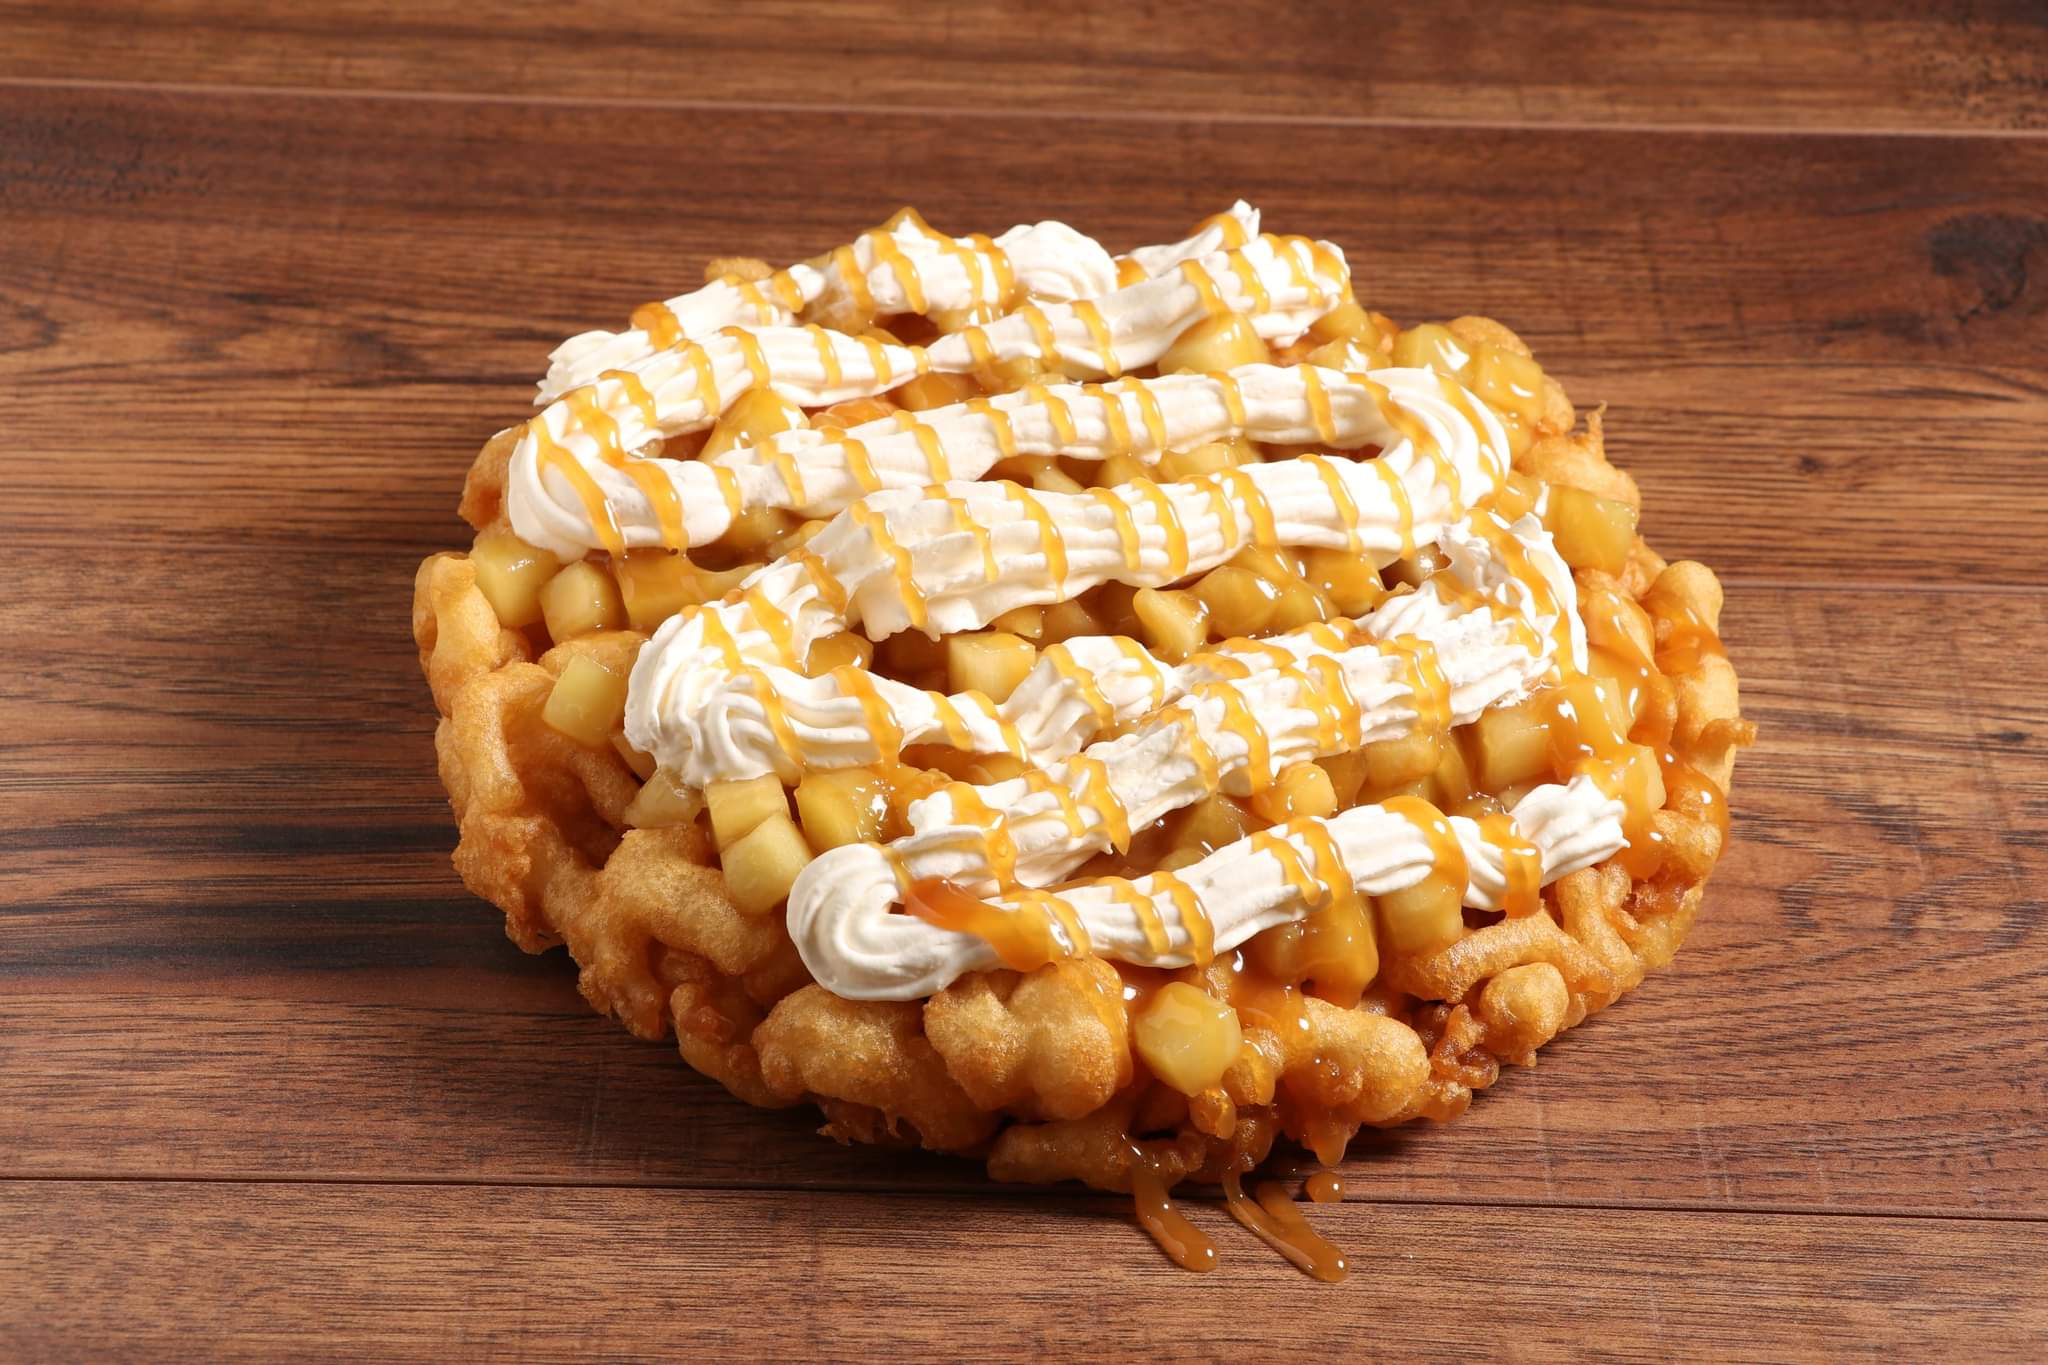 A salted caramel apple funnel cake from Silver Dollar City.